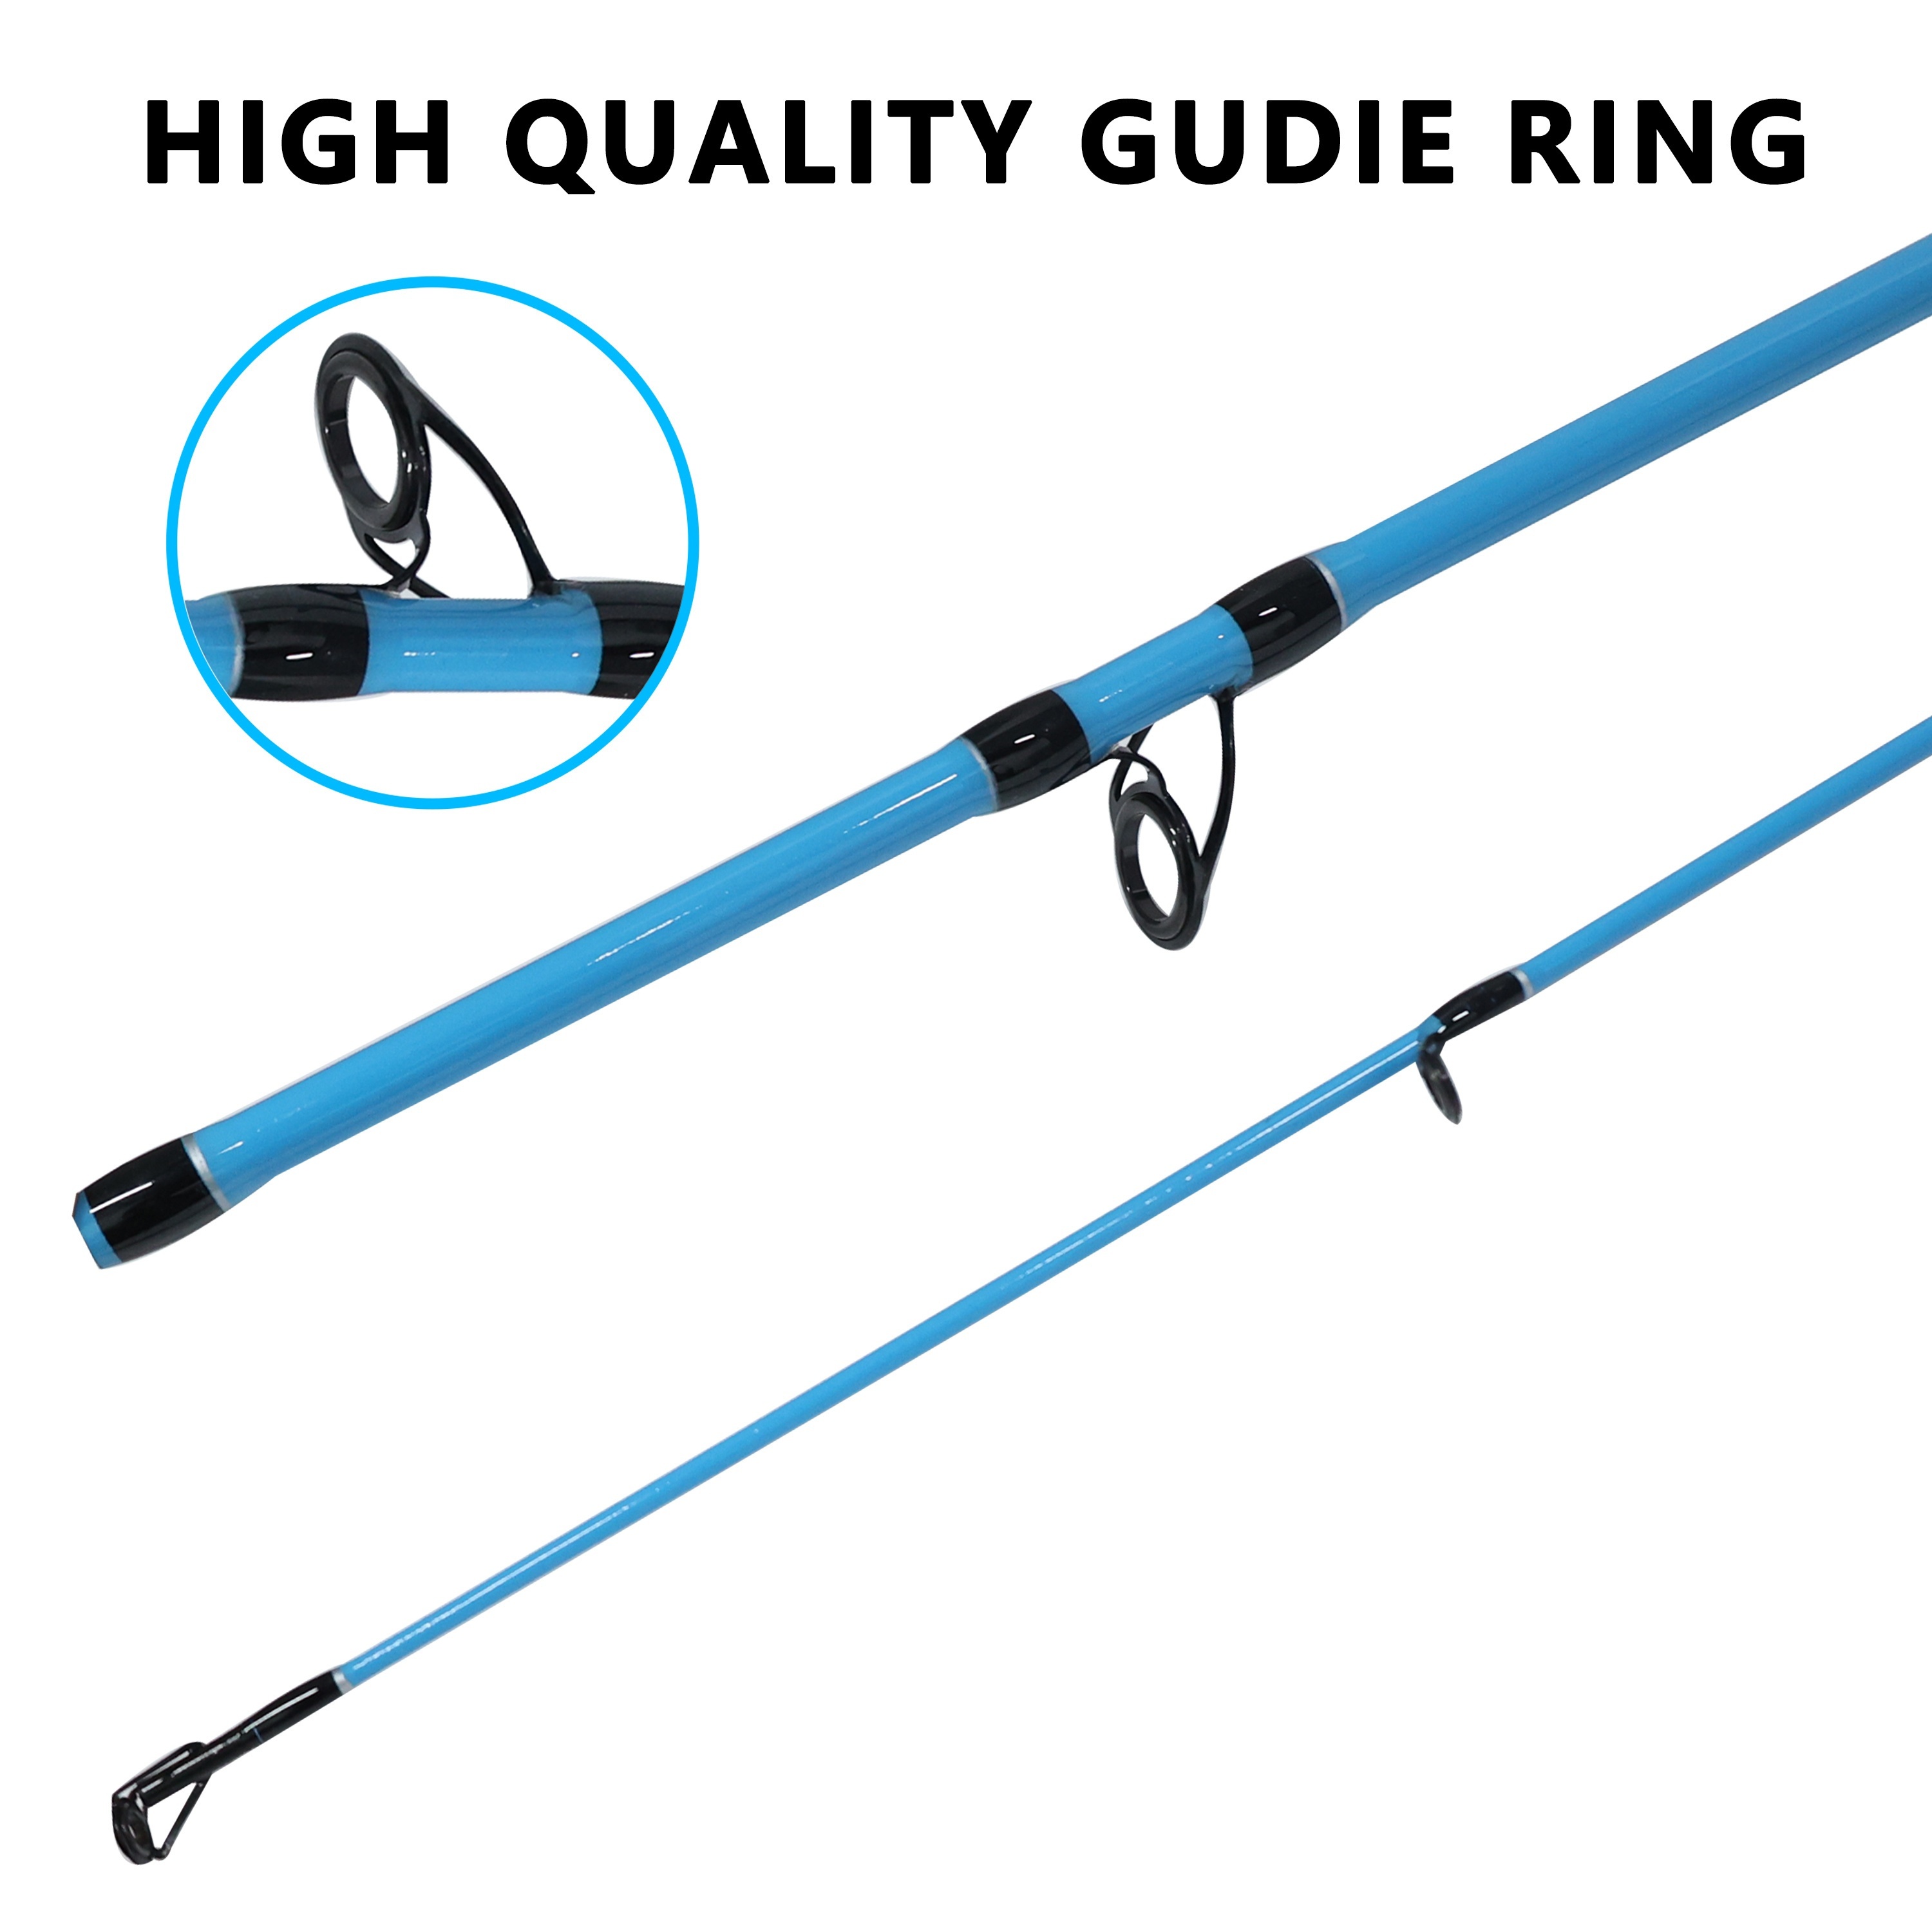 

2pcs Portable Carbon Fiber Surf Spinning Fishing Rod With Eva Handle - Lightweight And Durable For Travel And Surfing-1.5m/59inch